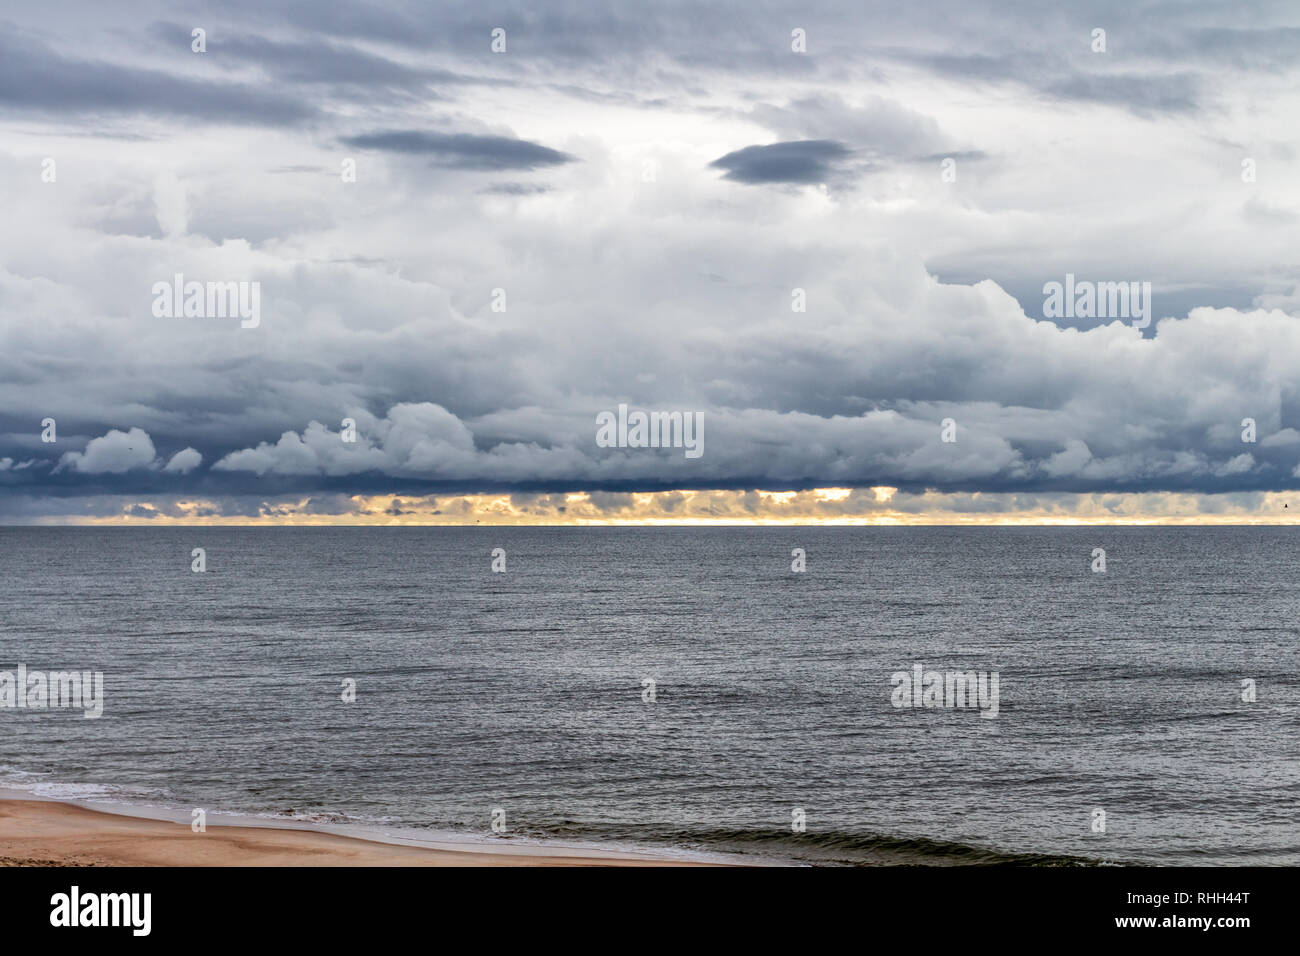 Curious cloud formation looking like a grimly monster above the Baltic Sea. Stock Photo